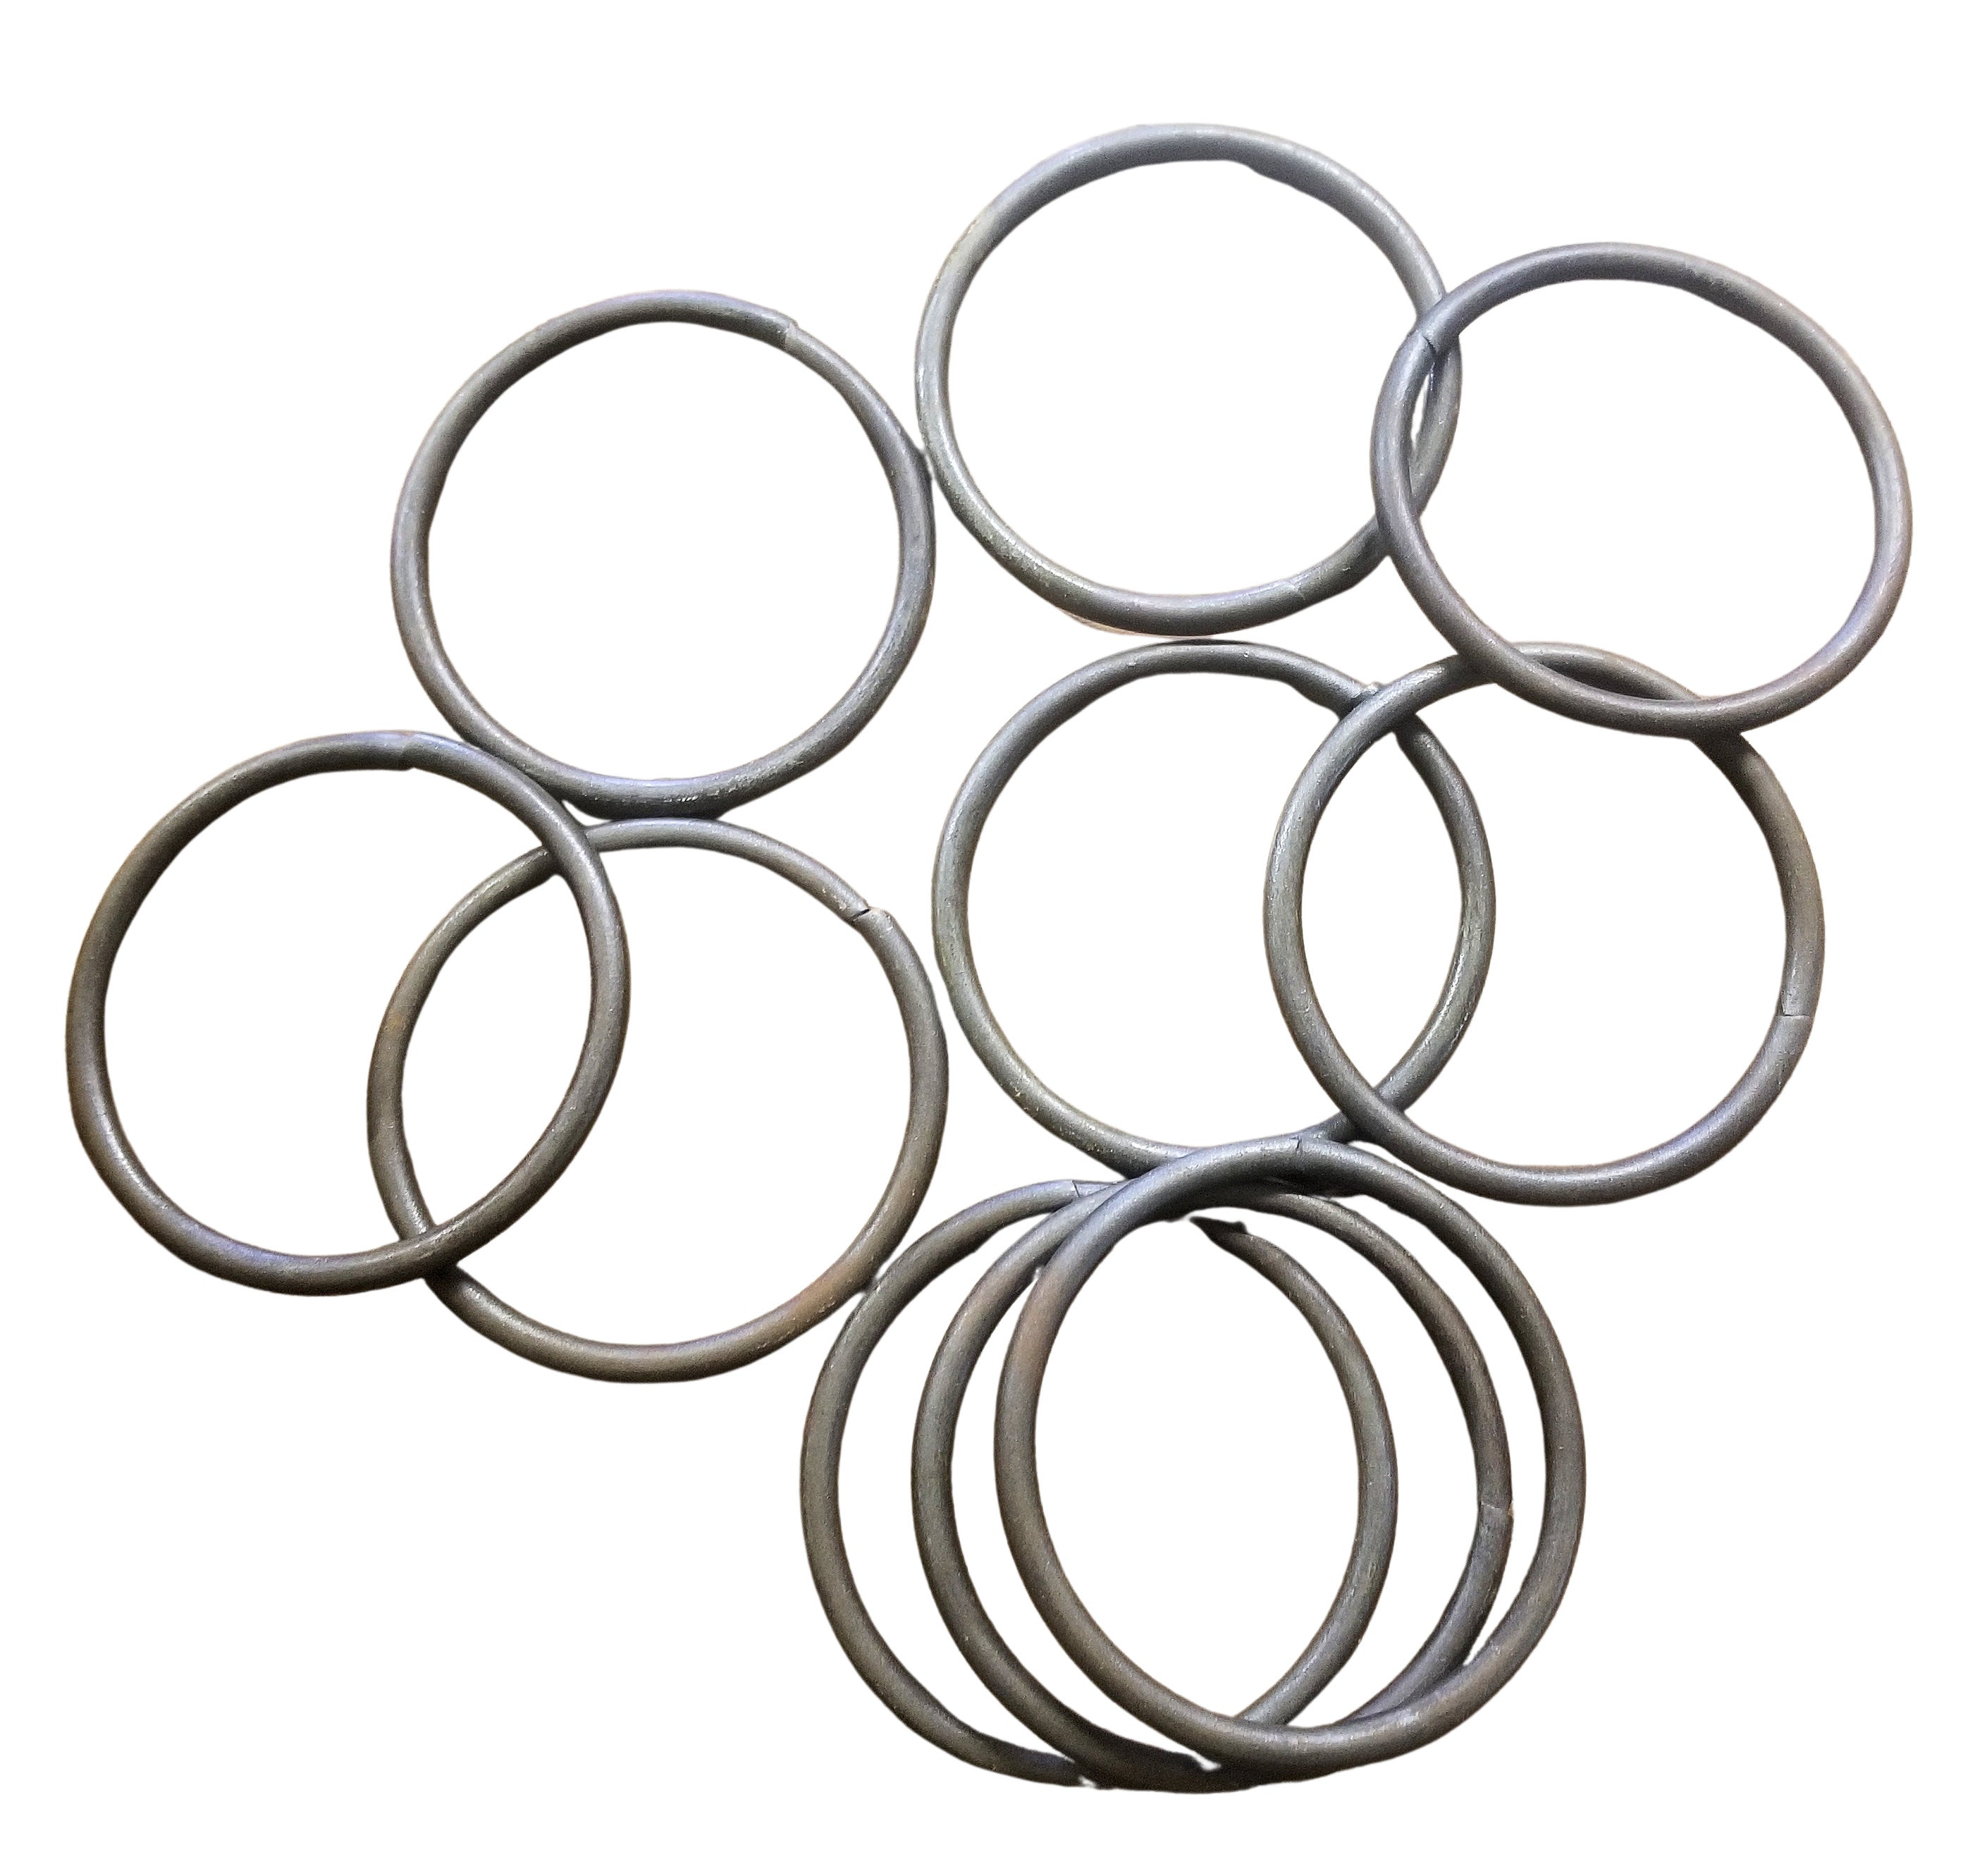 10 pc Steel Rings split 2.75 OD x 3/16" thick for crafters steel ring Carvers Olde Iron 